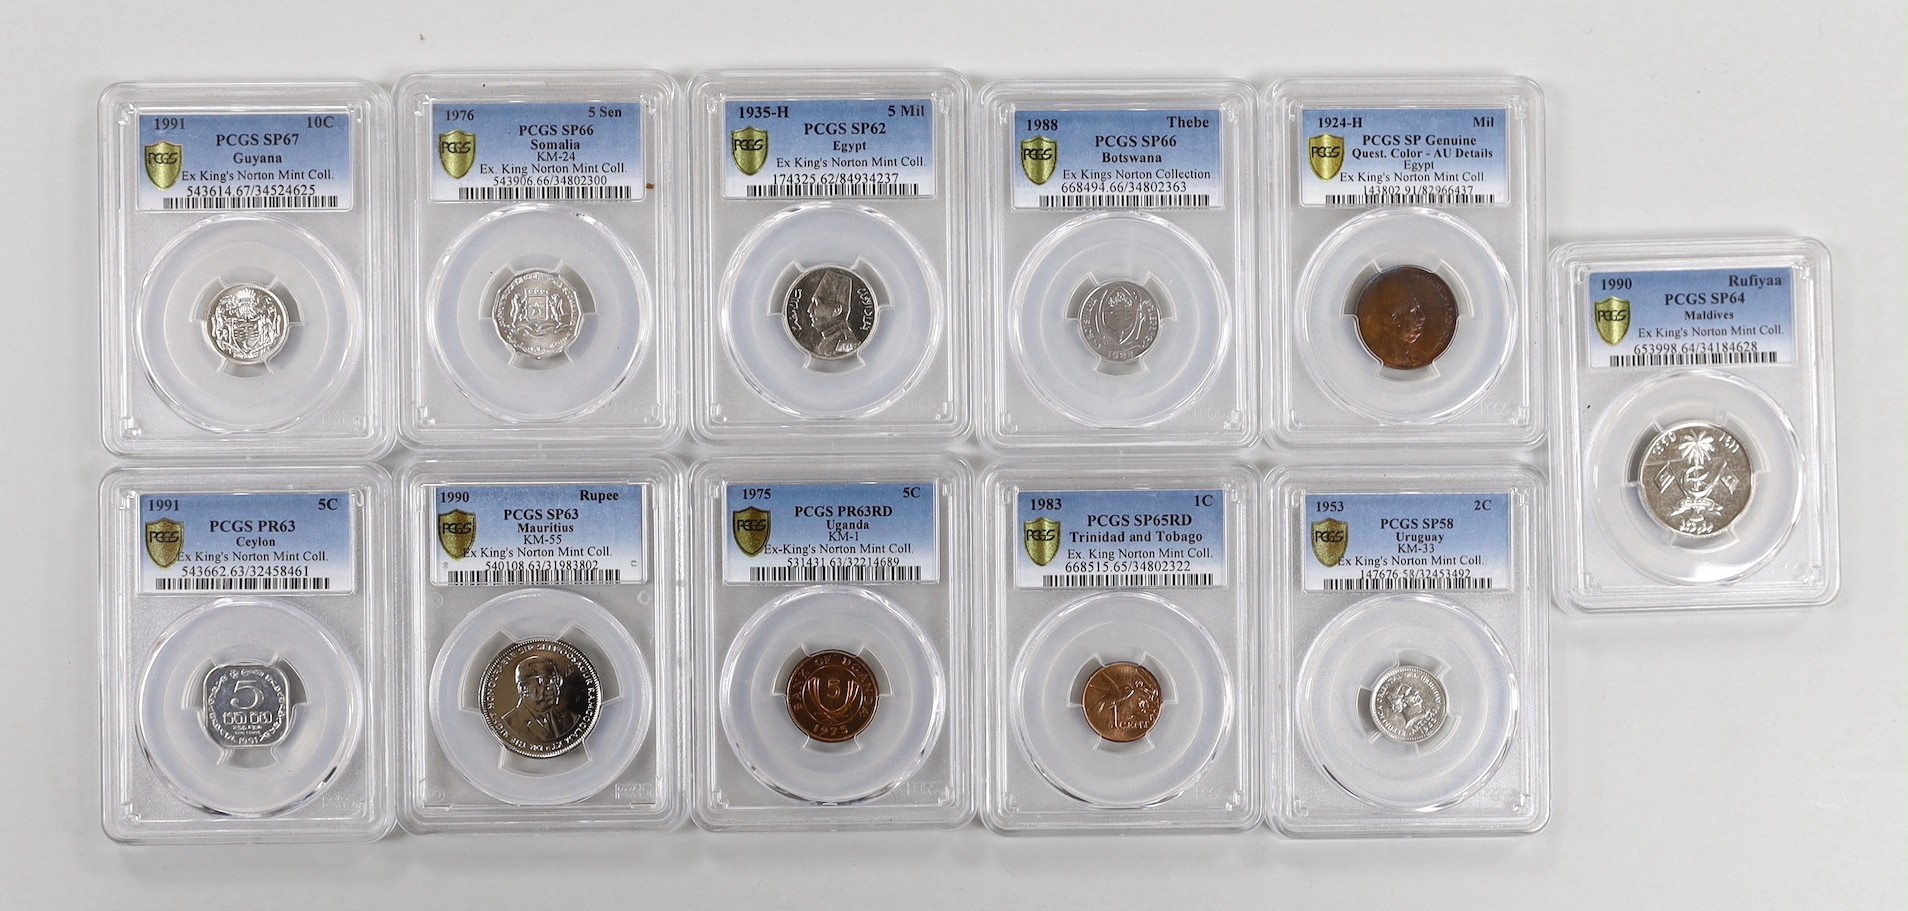 Ex. King’s Norton mint collection specimen and proof coins, PCGS slabbed and graded - Guyana 10